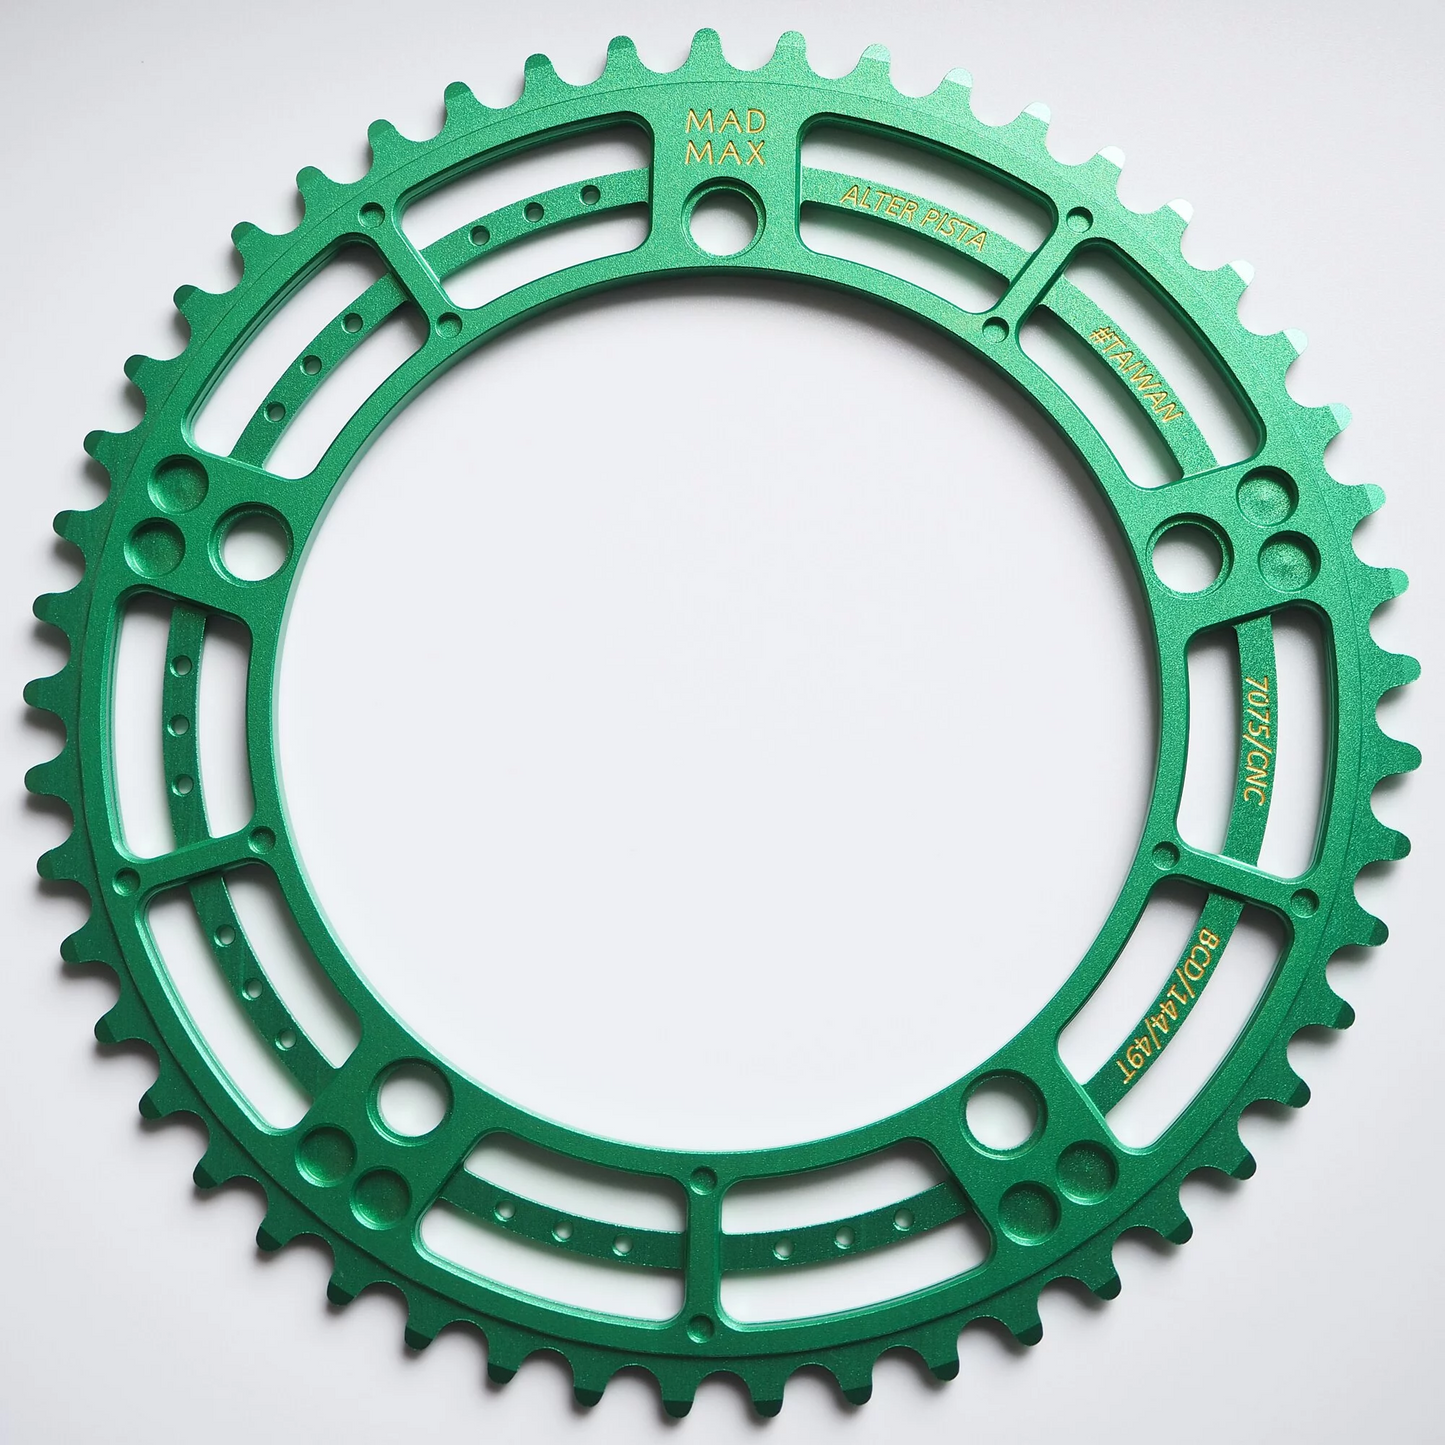 Alter Cycles Mad Max Chainring MM49G - Green 49T